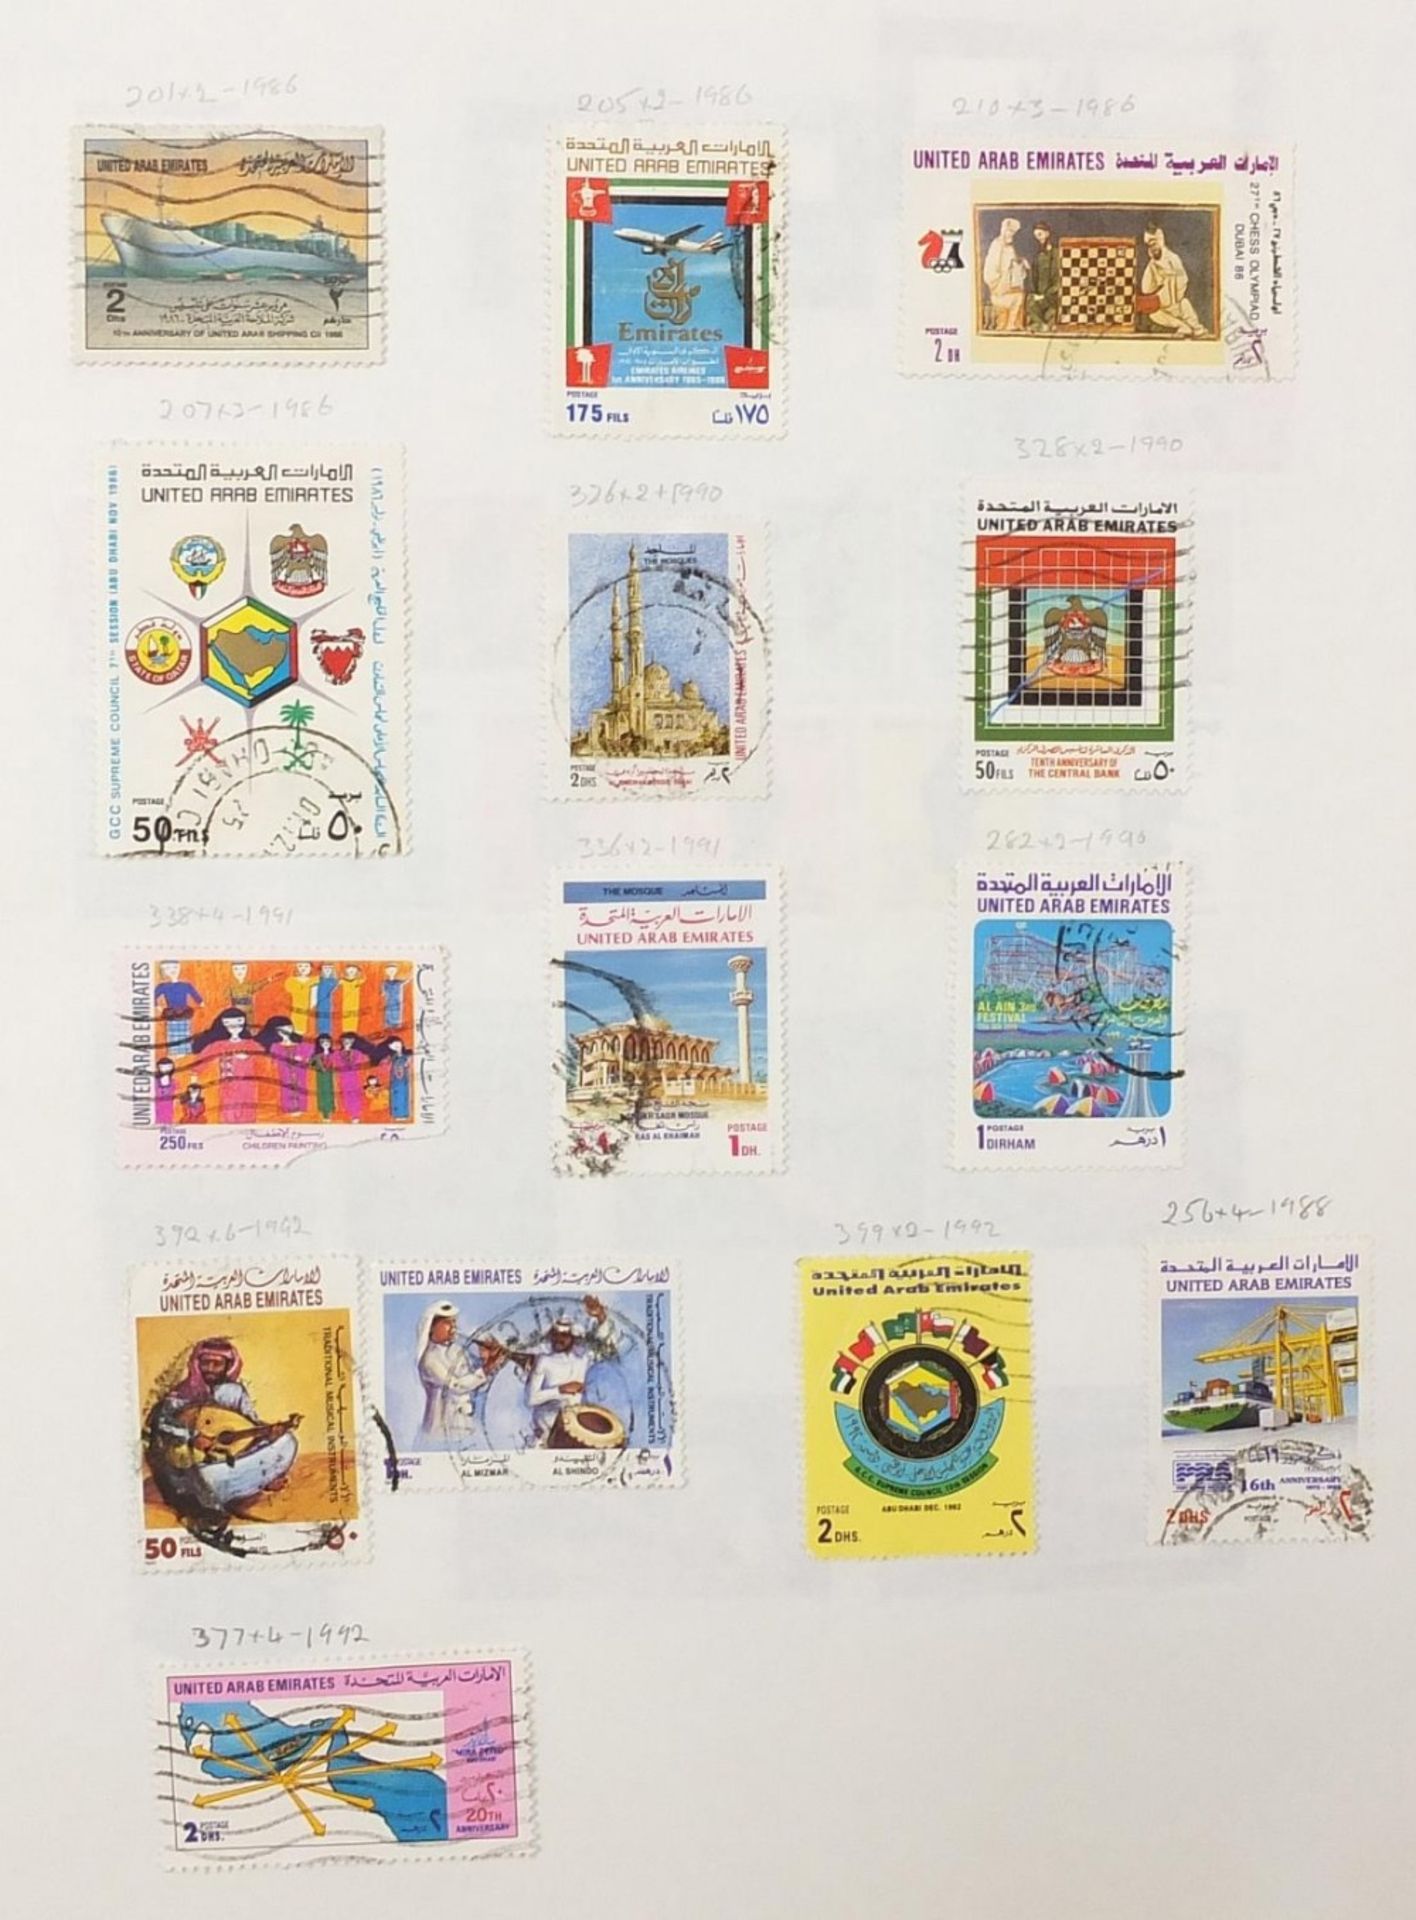 Extensive collection of antique and later world stamps arranged in albums including Brazil, - Image 30 of 52